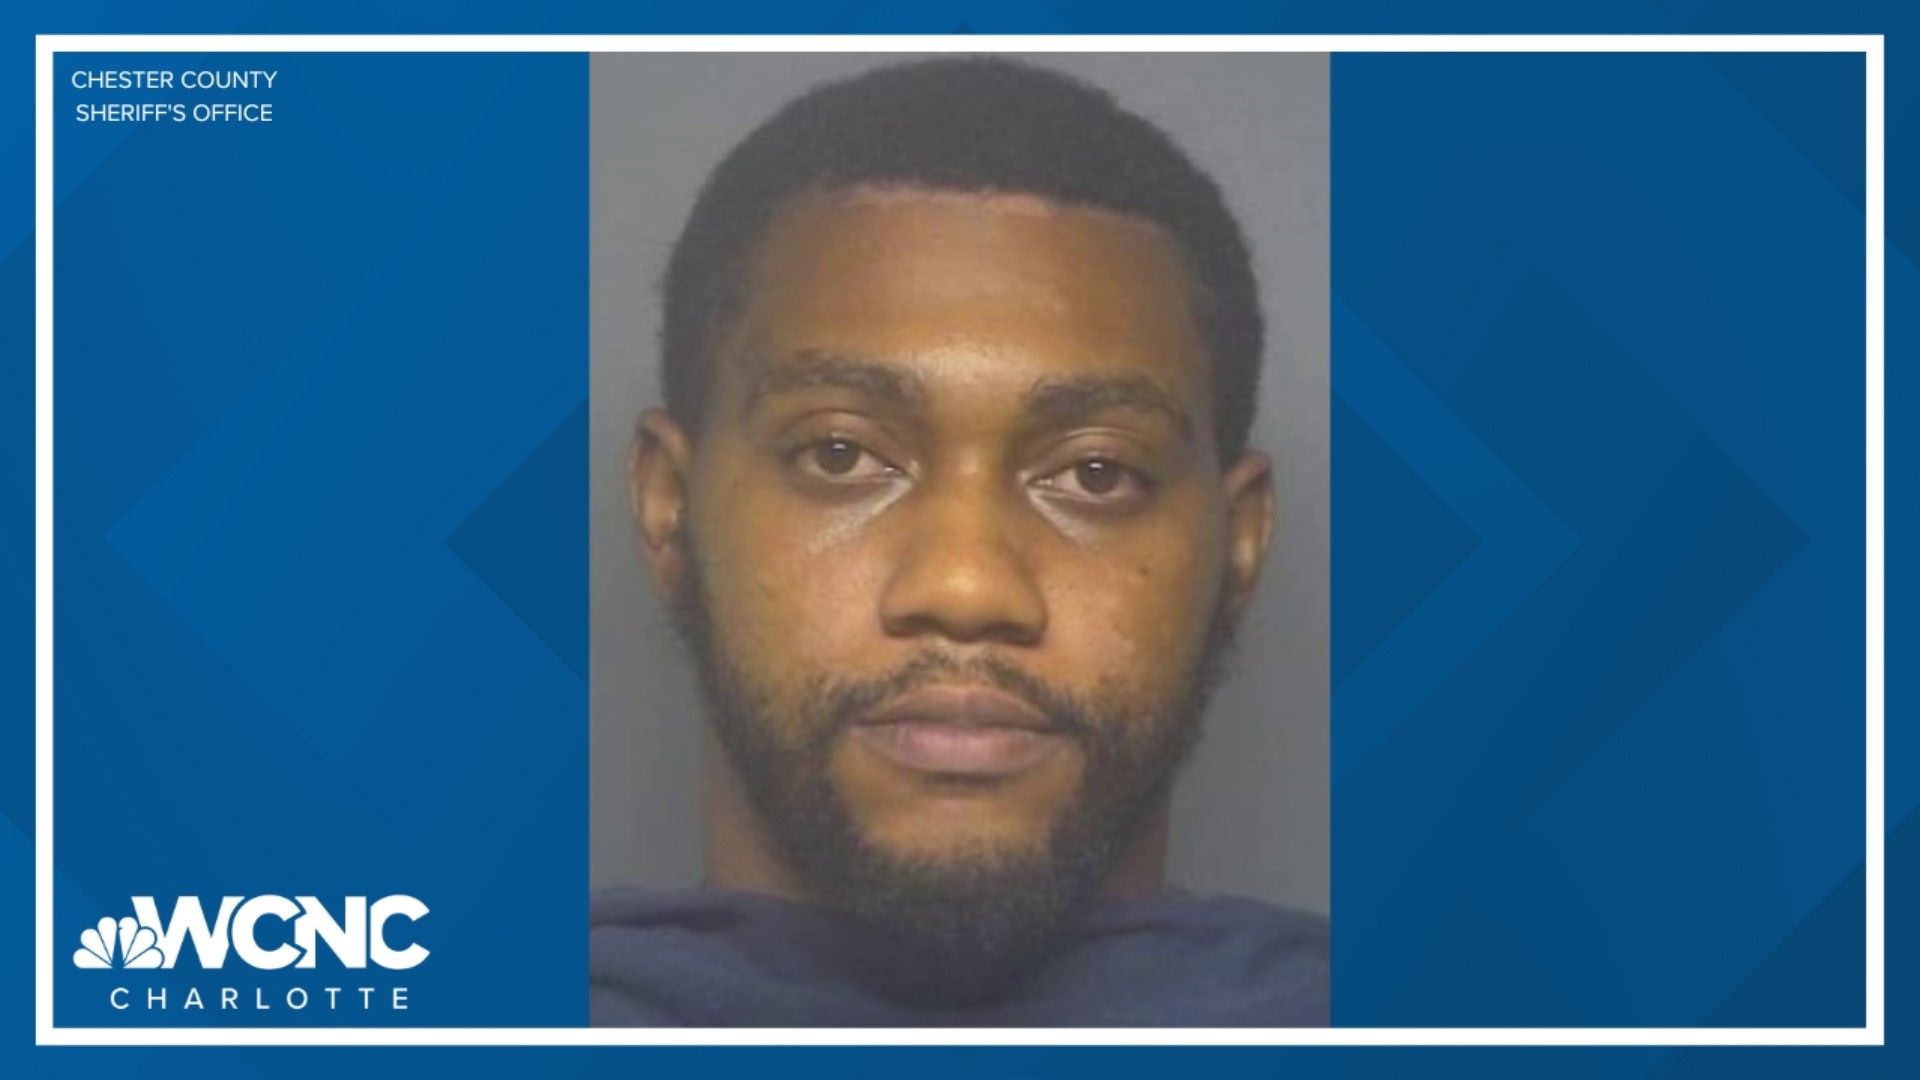 The Chester County Sheriff’s Office said the suspect in a Chester County murder investigation has been taken into custody.